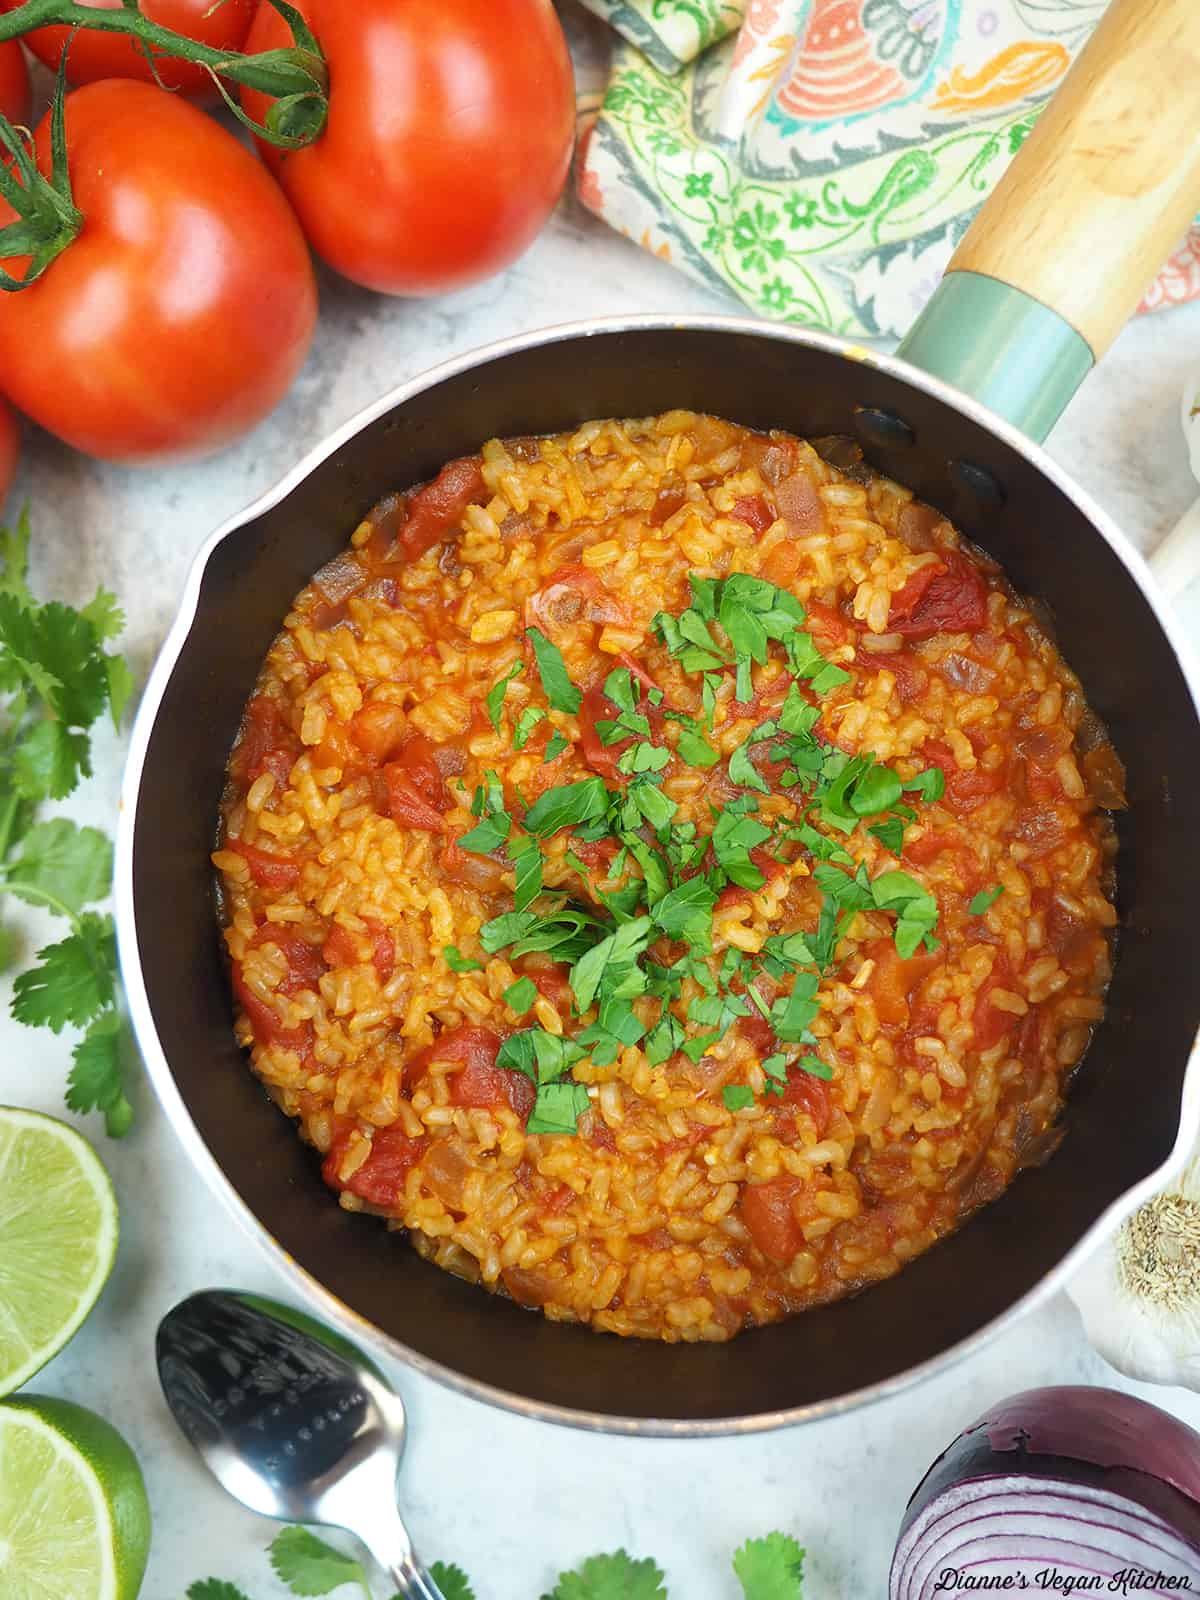 pot of rice overhead, surrounded by tomatoes, limes, and onion